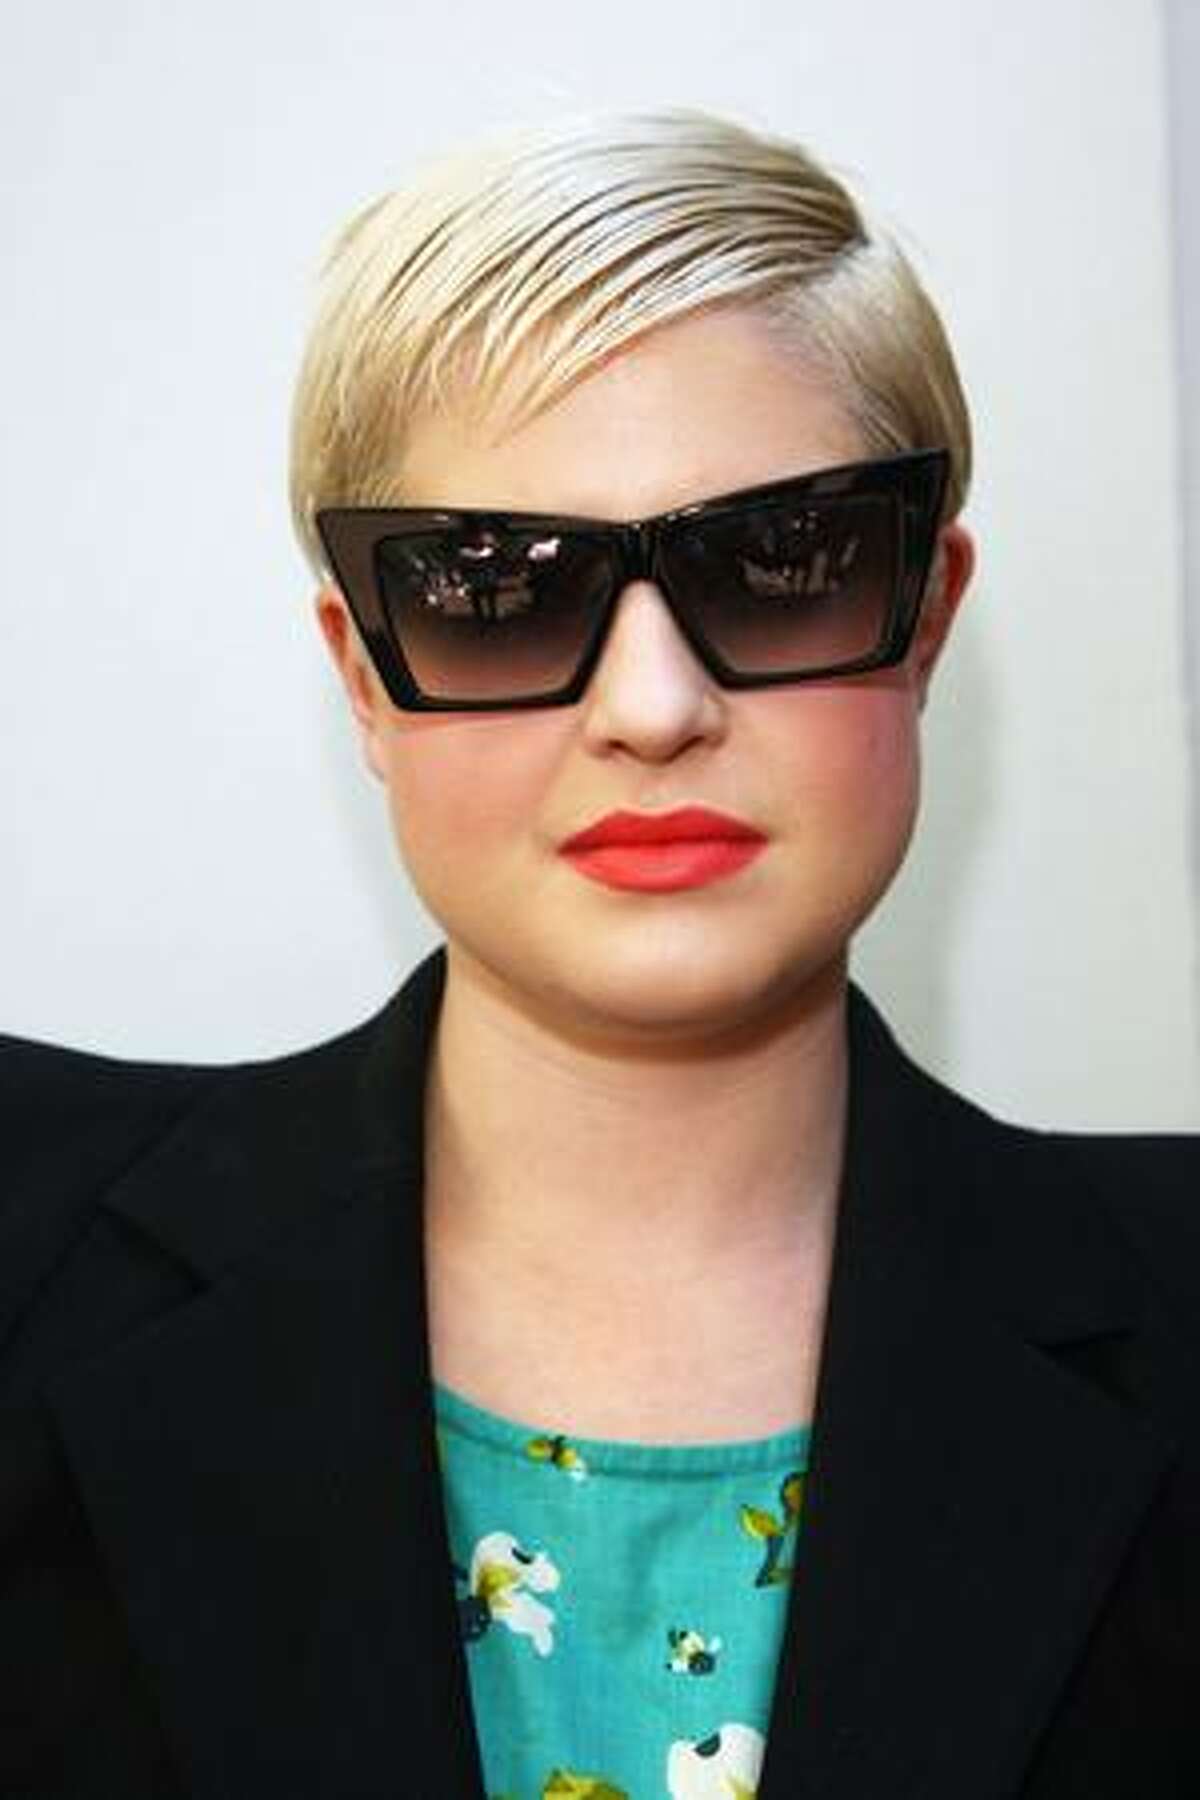 Kelly Osbourne poses backstage prior the Frankie Morello show as part of Milan Menswear Fashion Week Spring/Summer 2010 on Sunday in Milan, Italy.